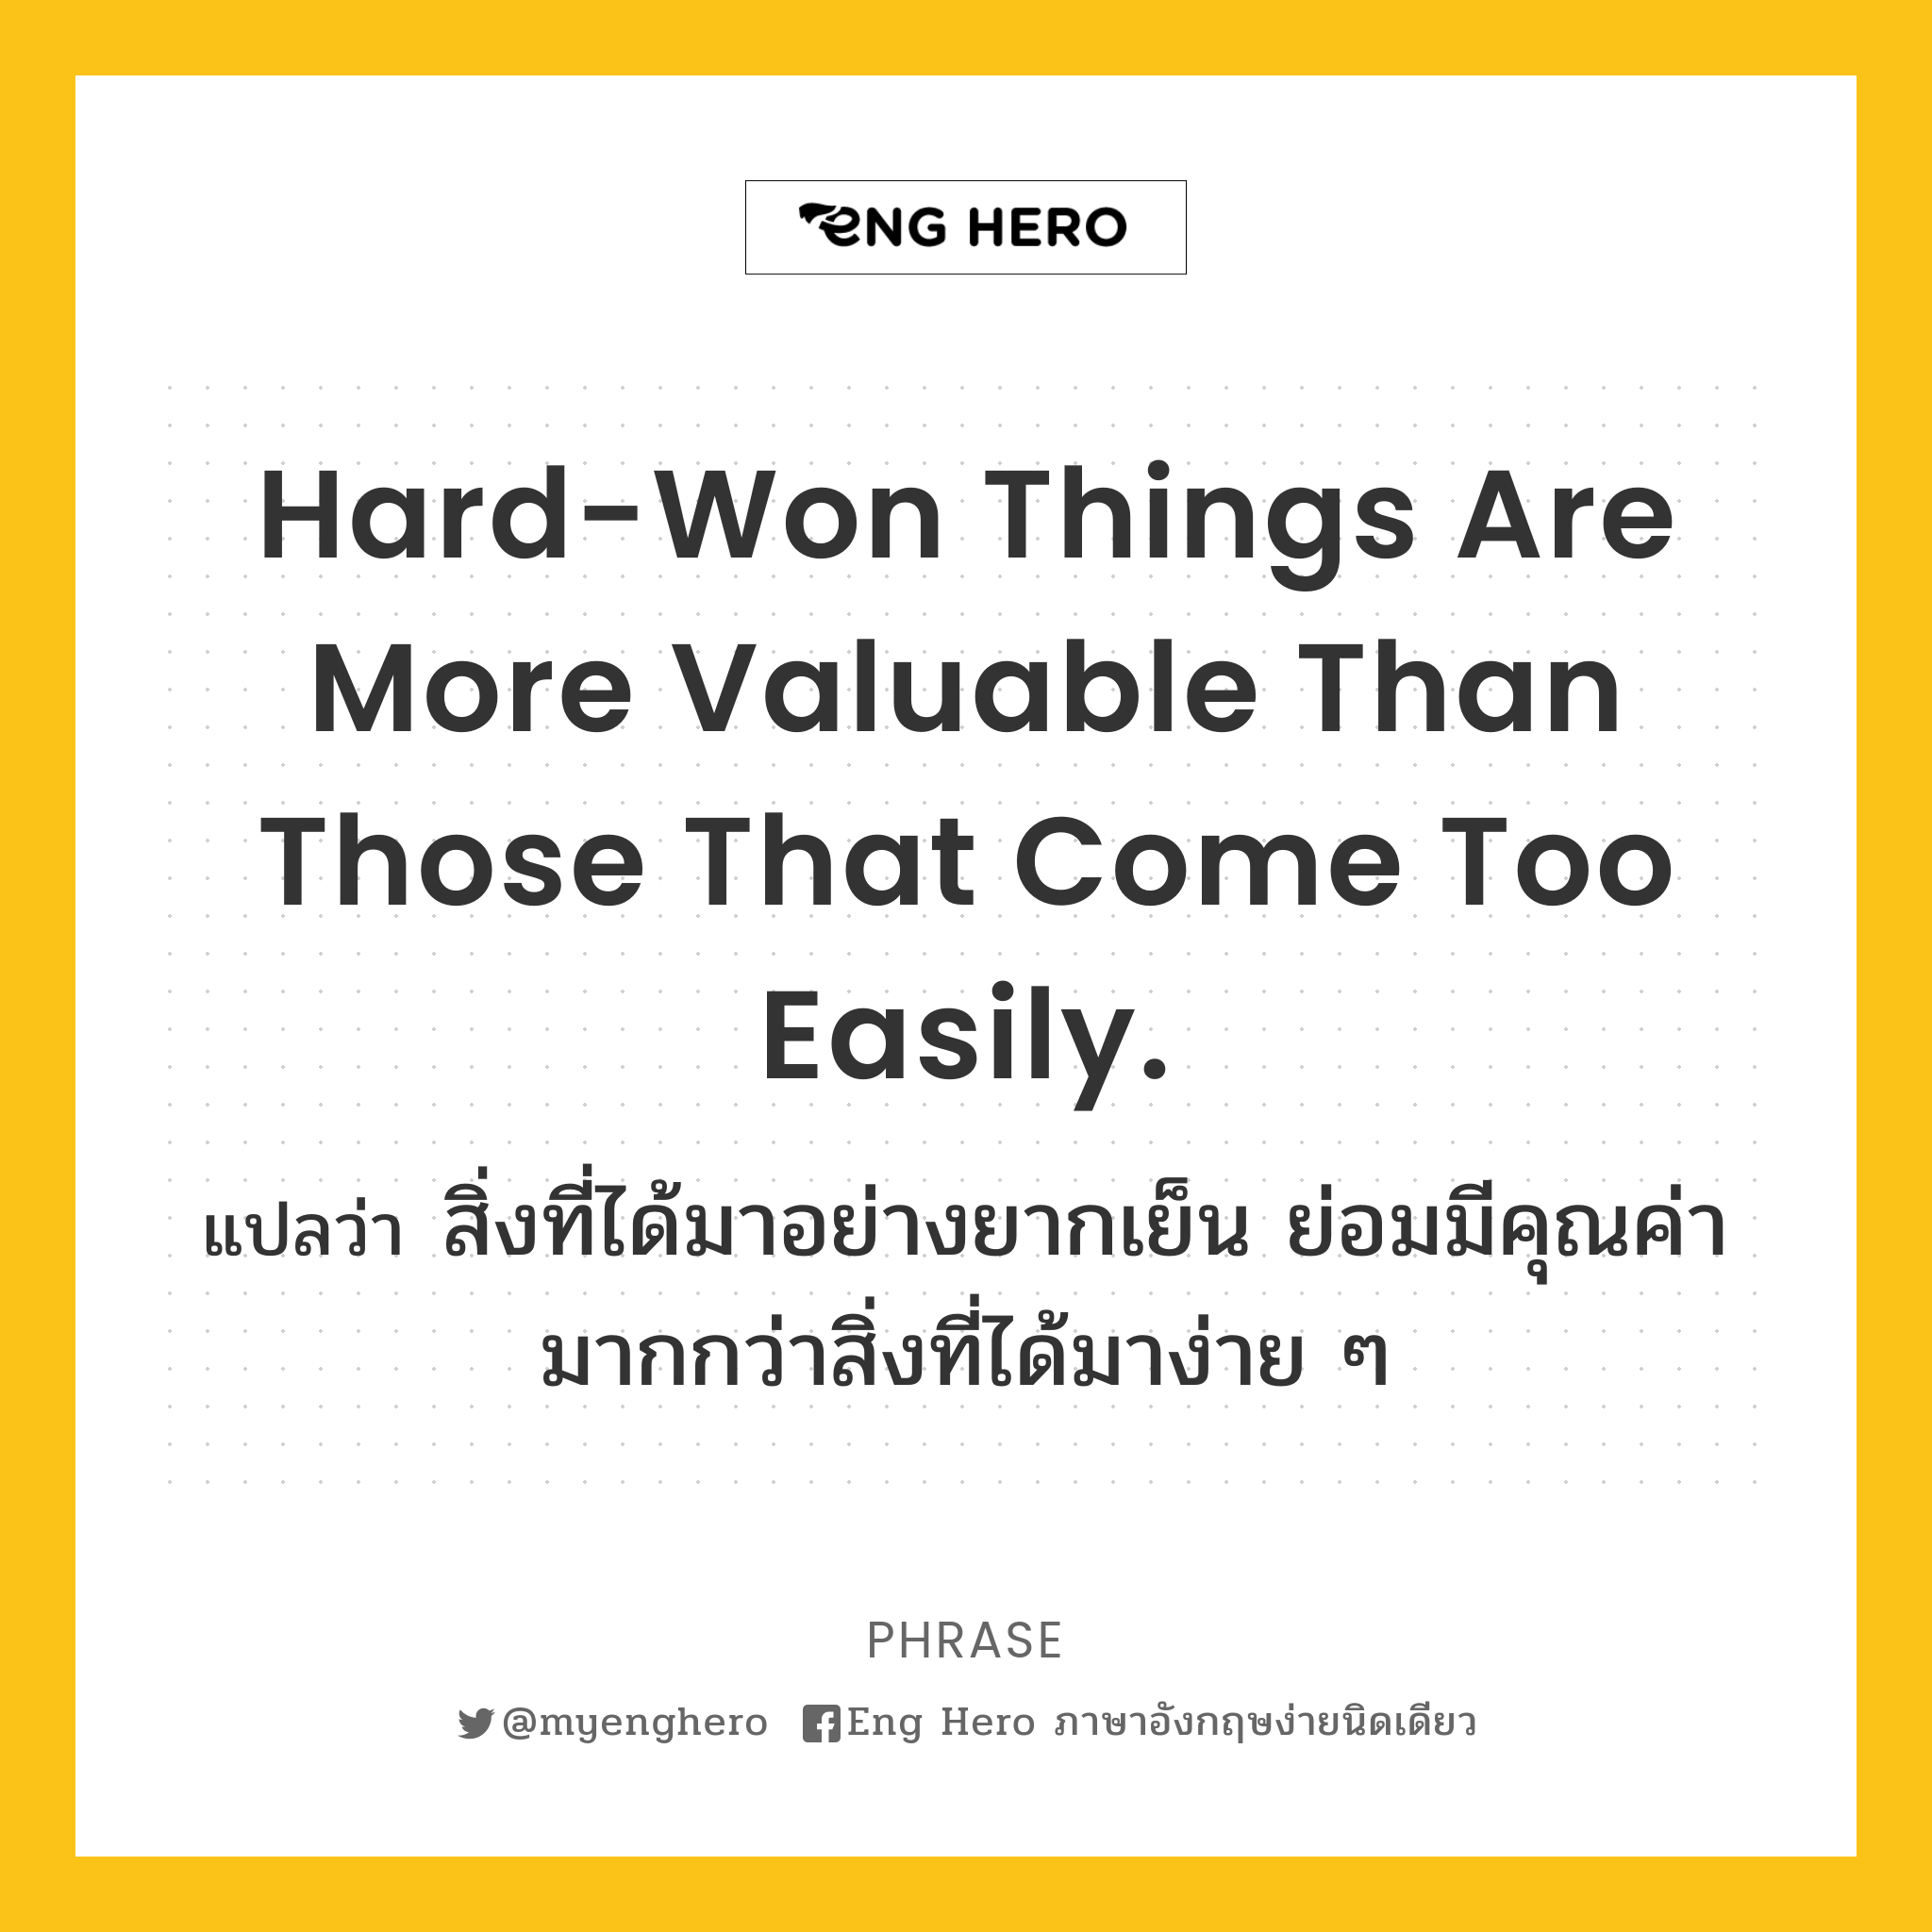 Hard-won things are more valuable than those that come too easily.